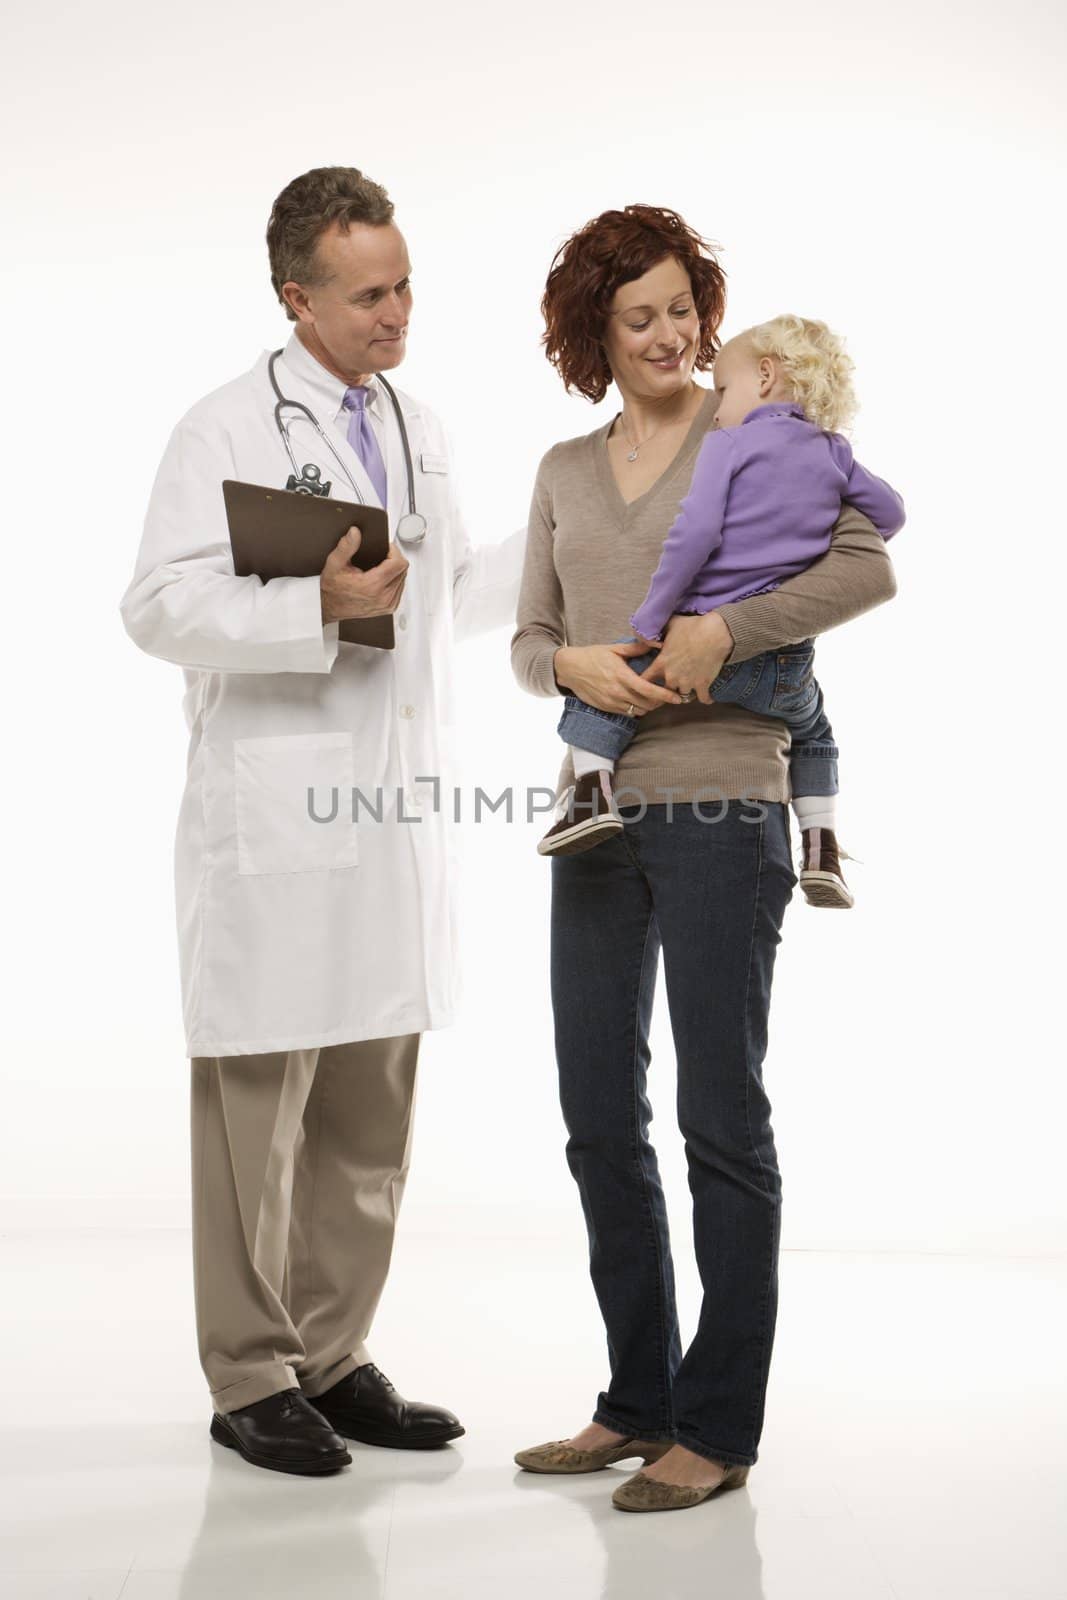 Middle-aged adult Caucasian male doctor introducing himself to mid-adult mother and her daughter.